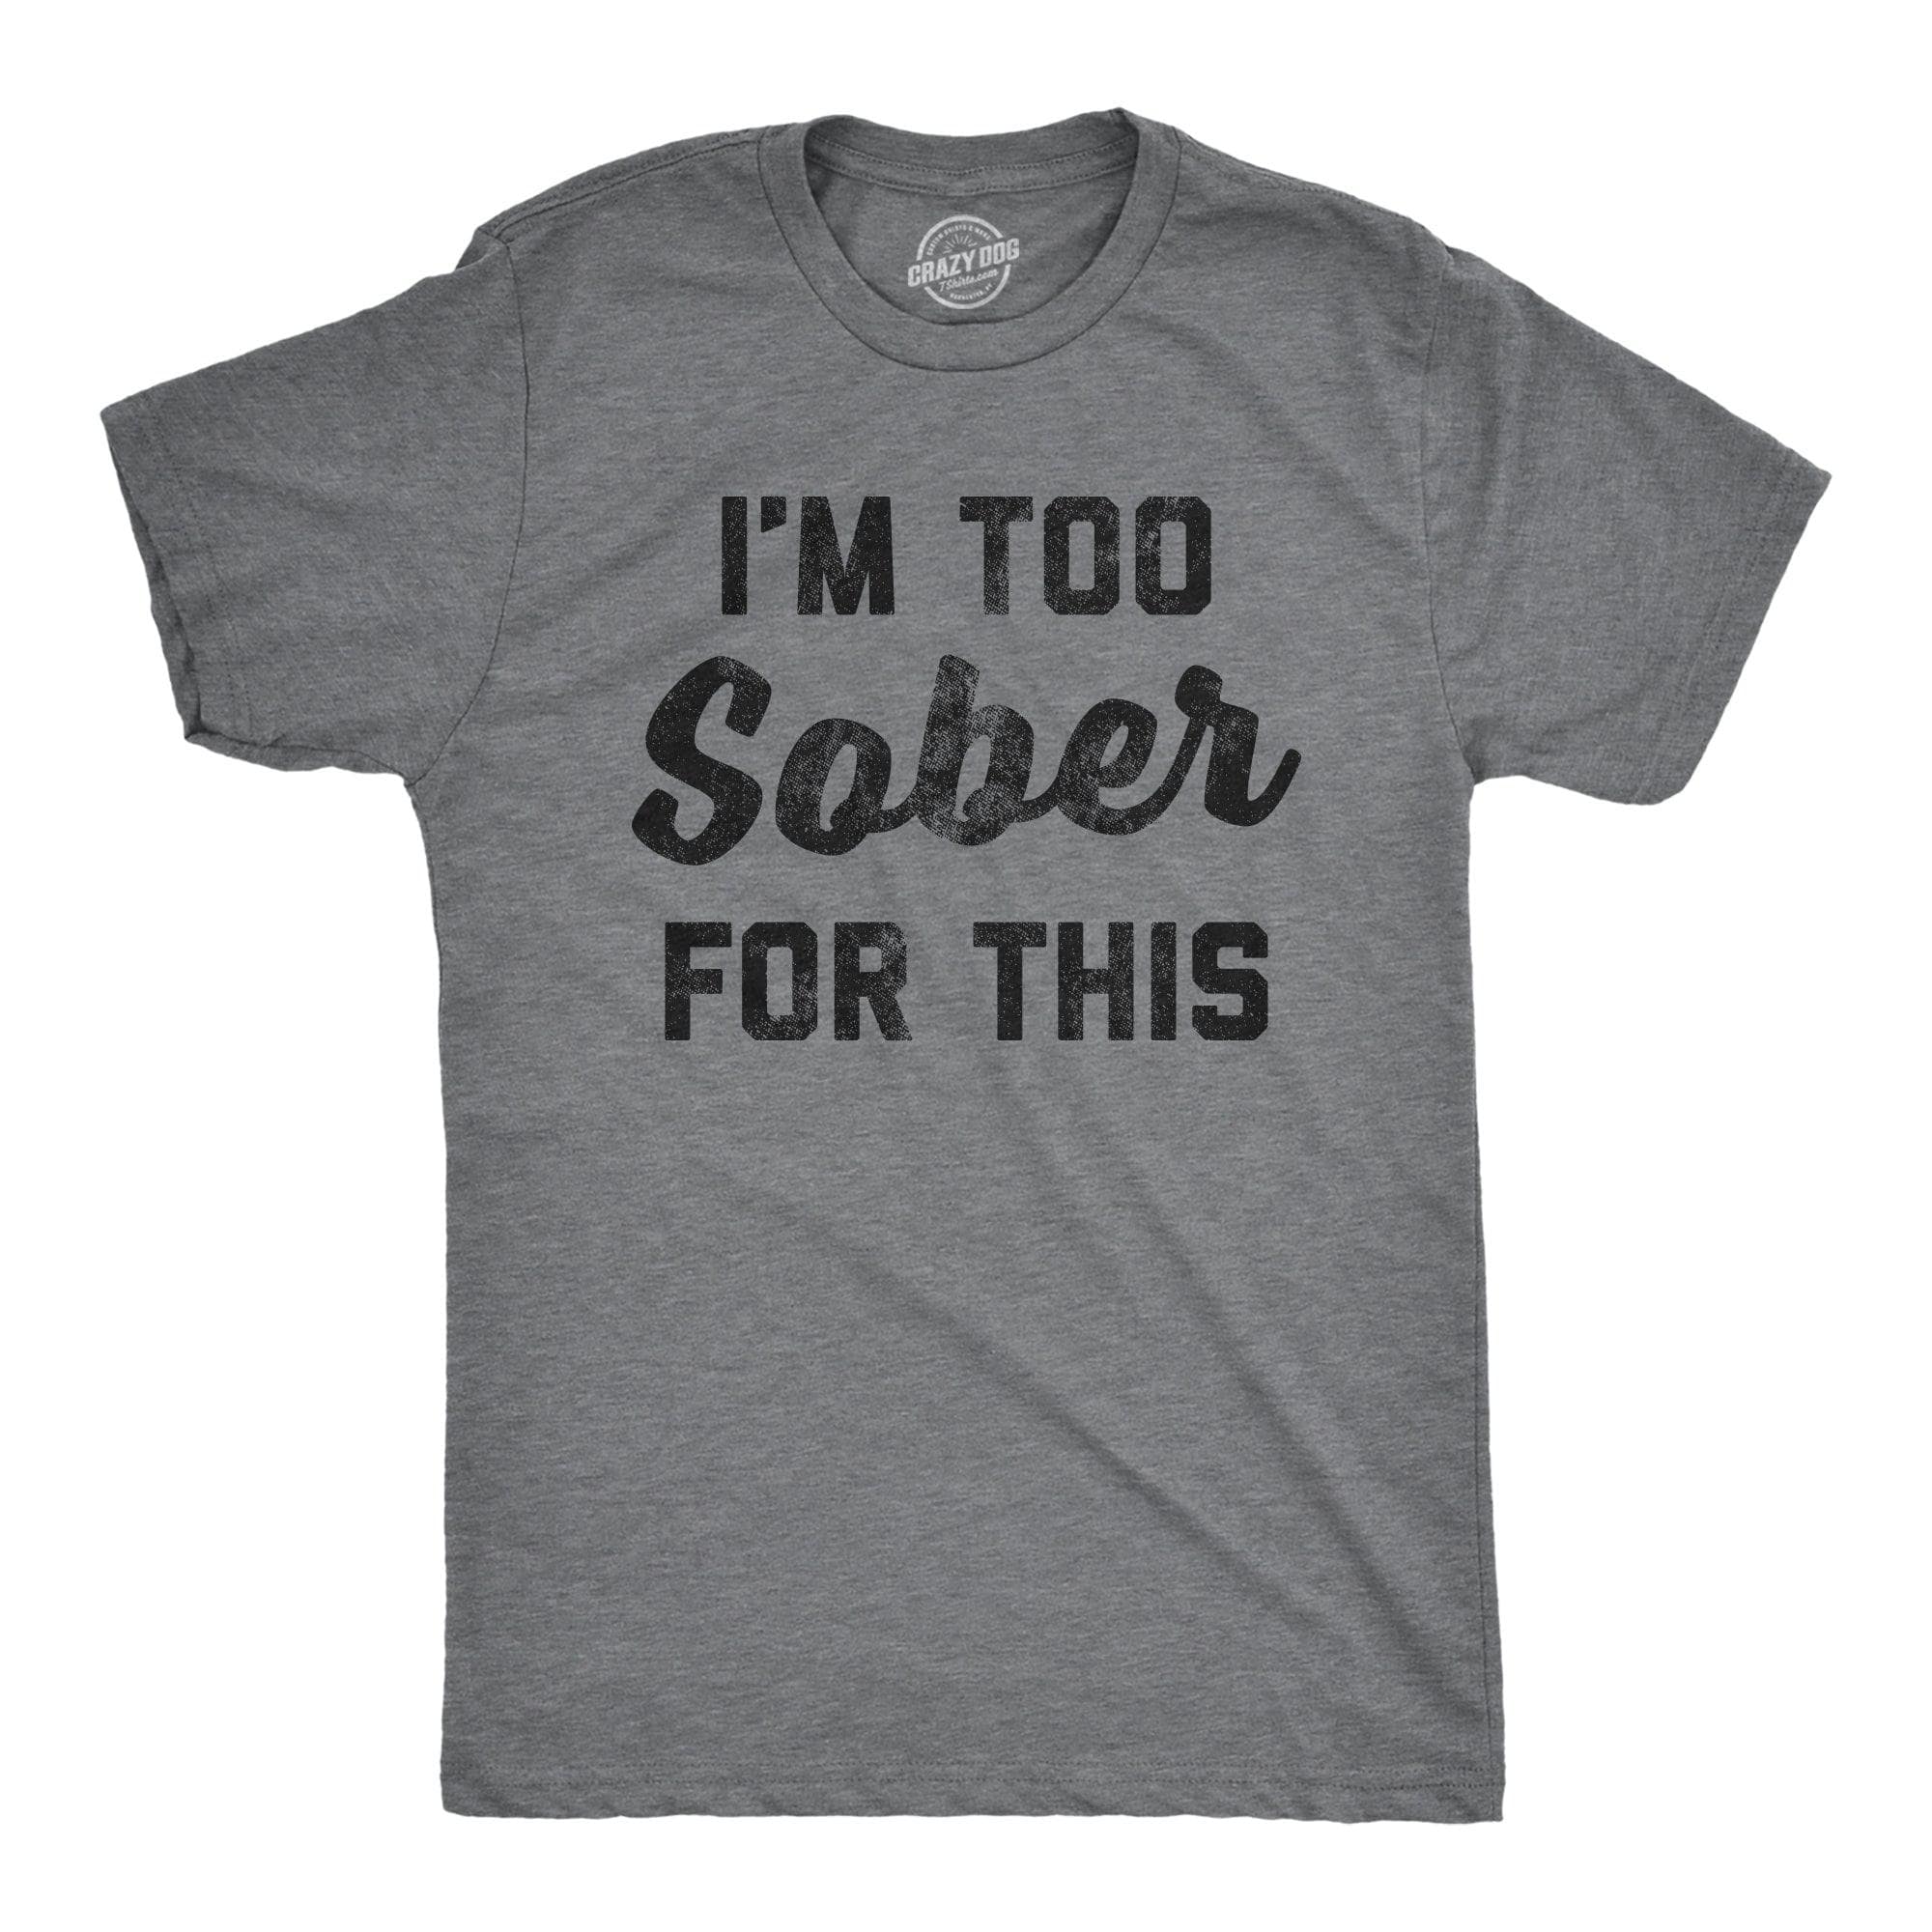 I'm Too Sober For This Men's Tshirt  -  Crazy Dog T-Shirts